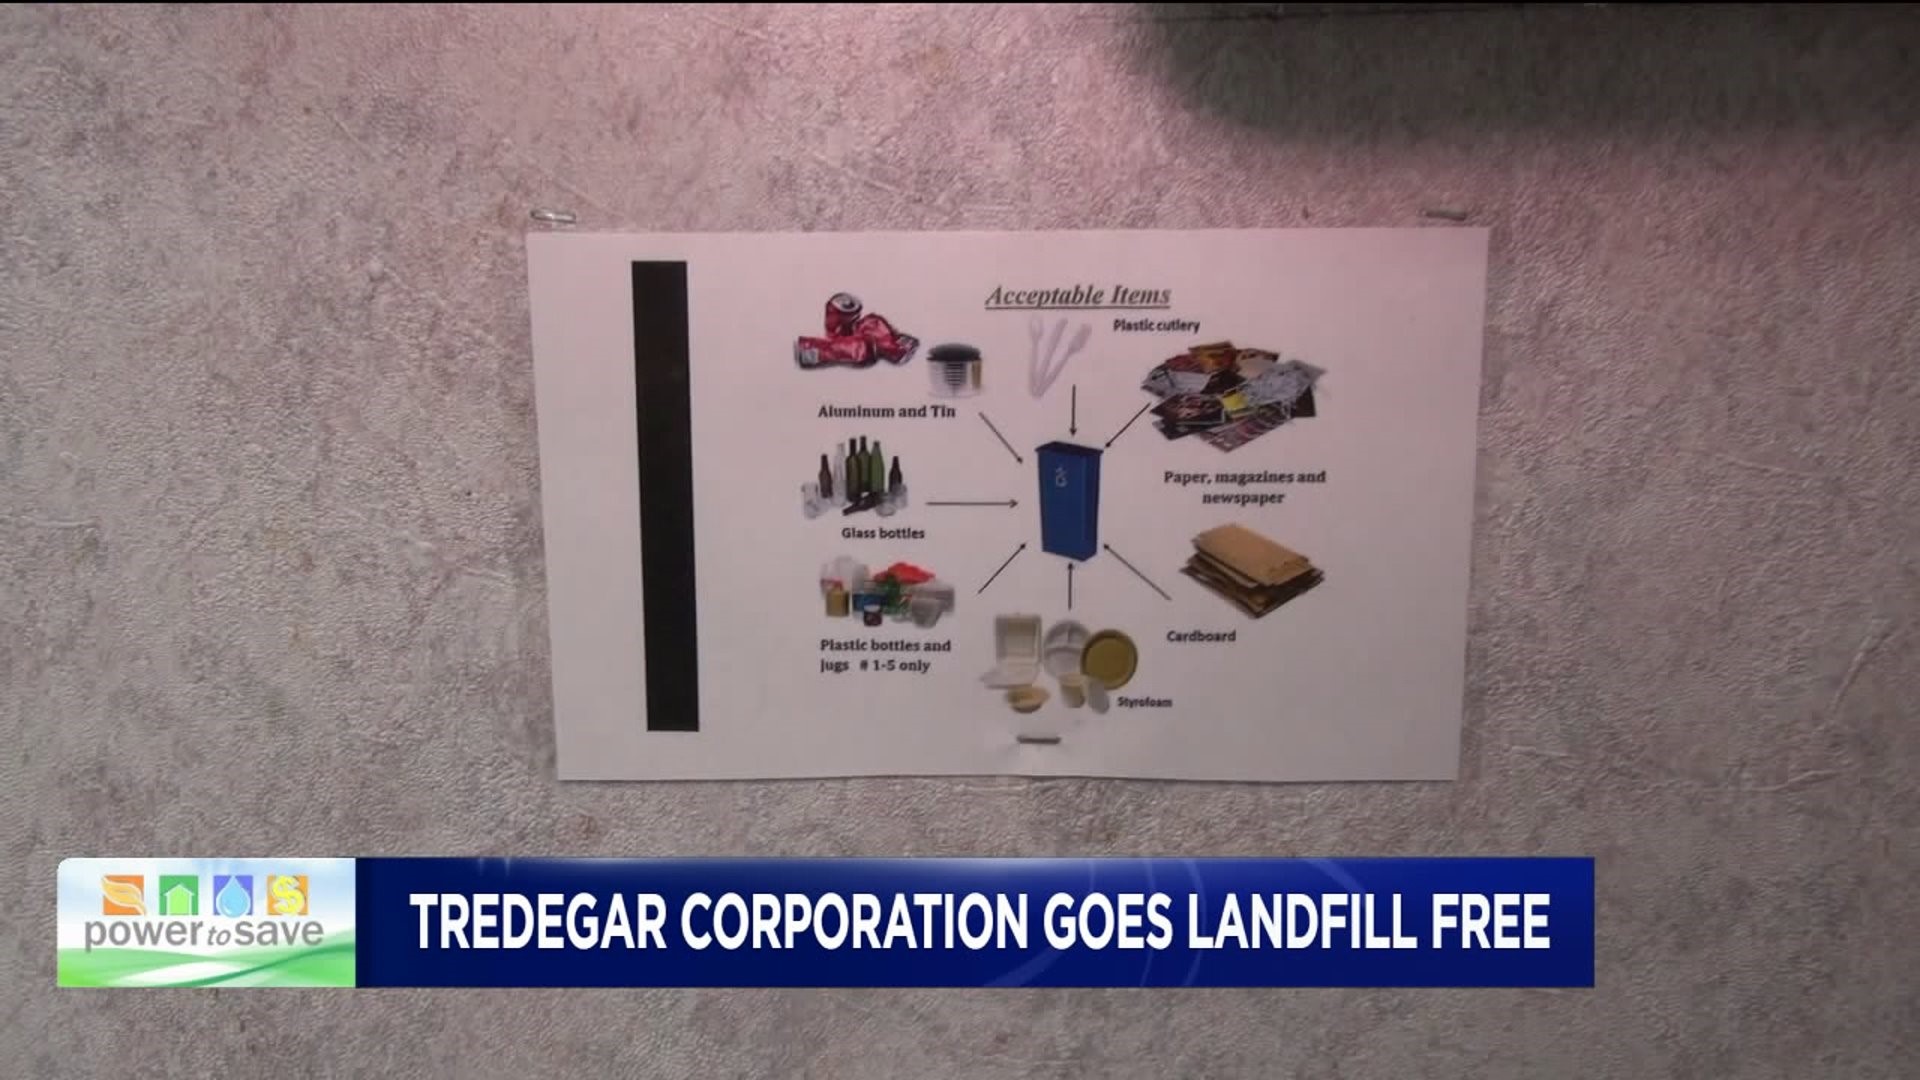 Power To Save: Tredegar Corporation Goes Landfill-free